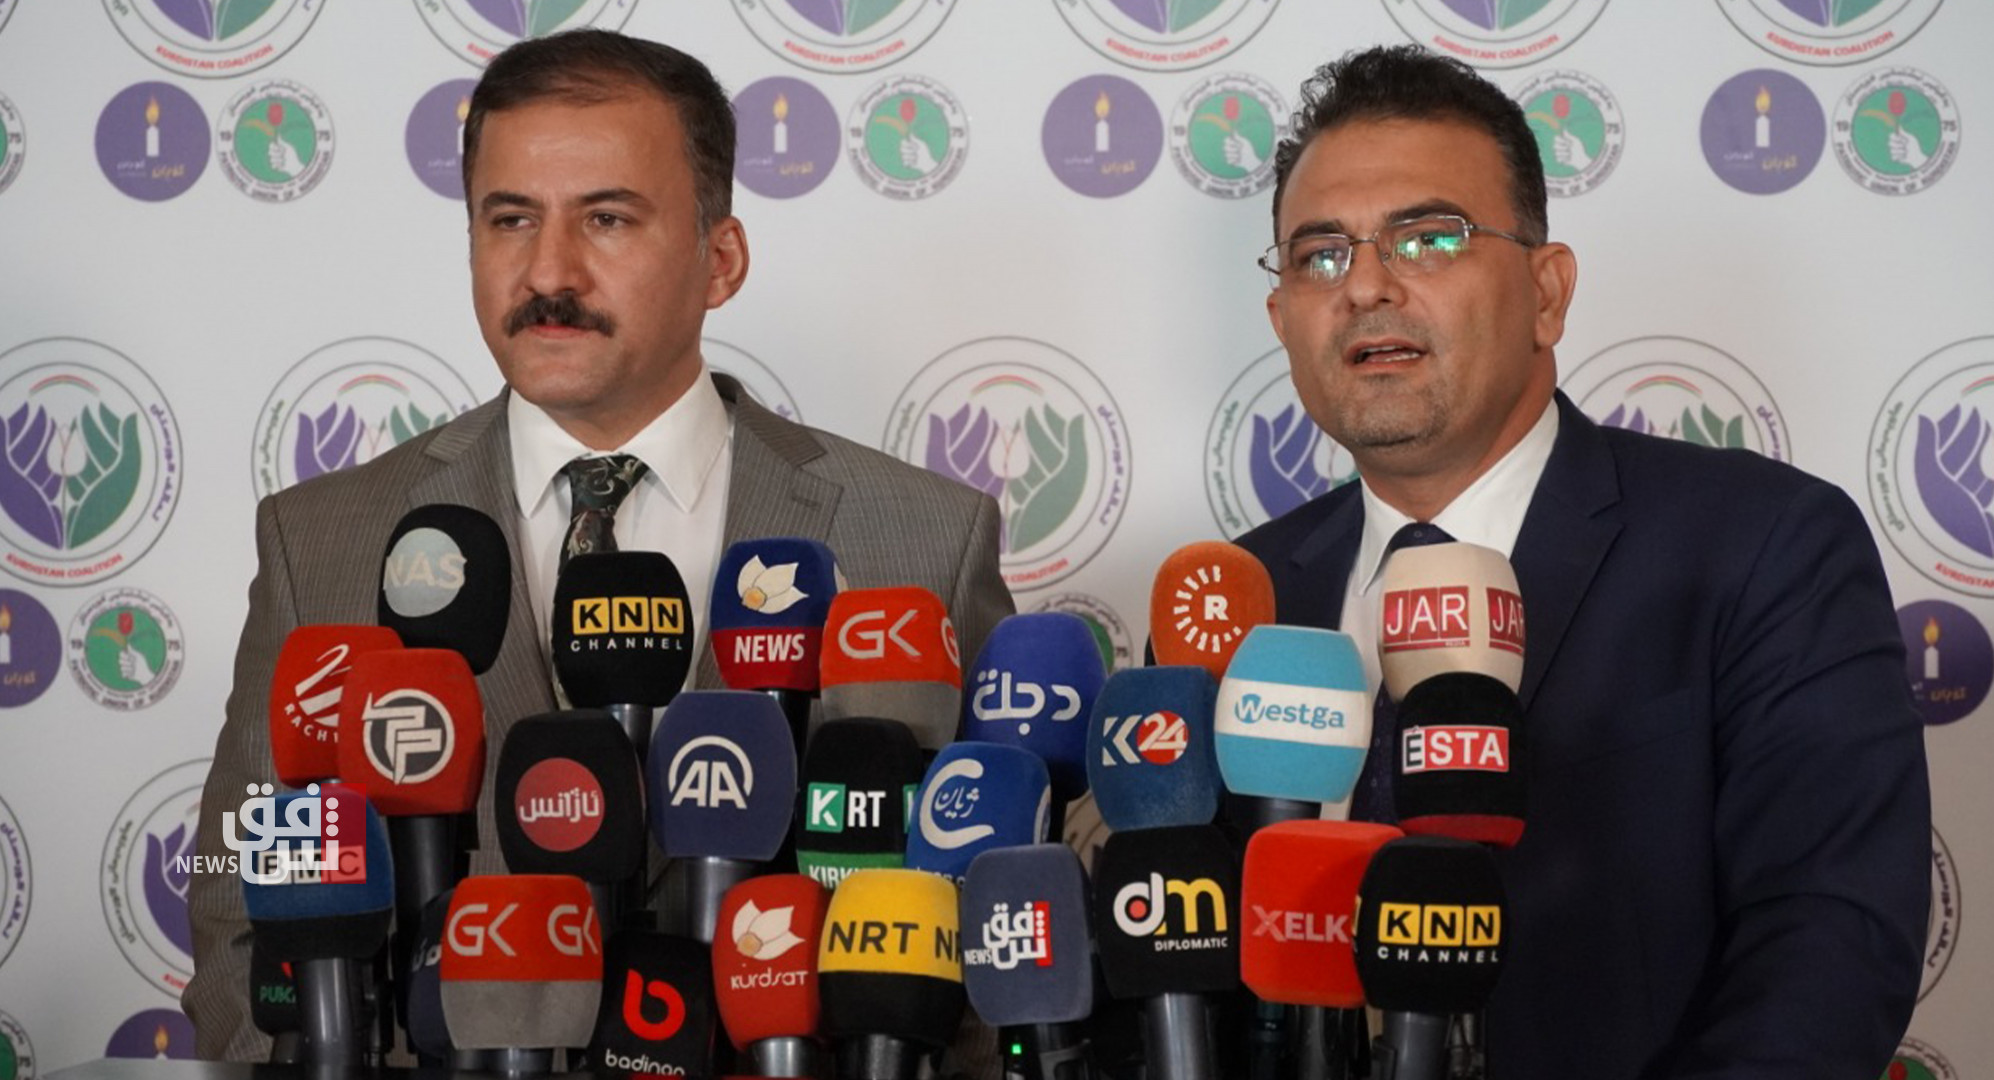 PUK and the Change form an alliance for the elections